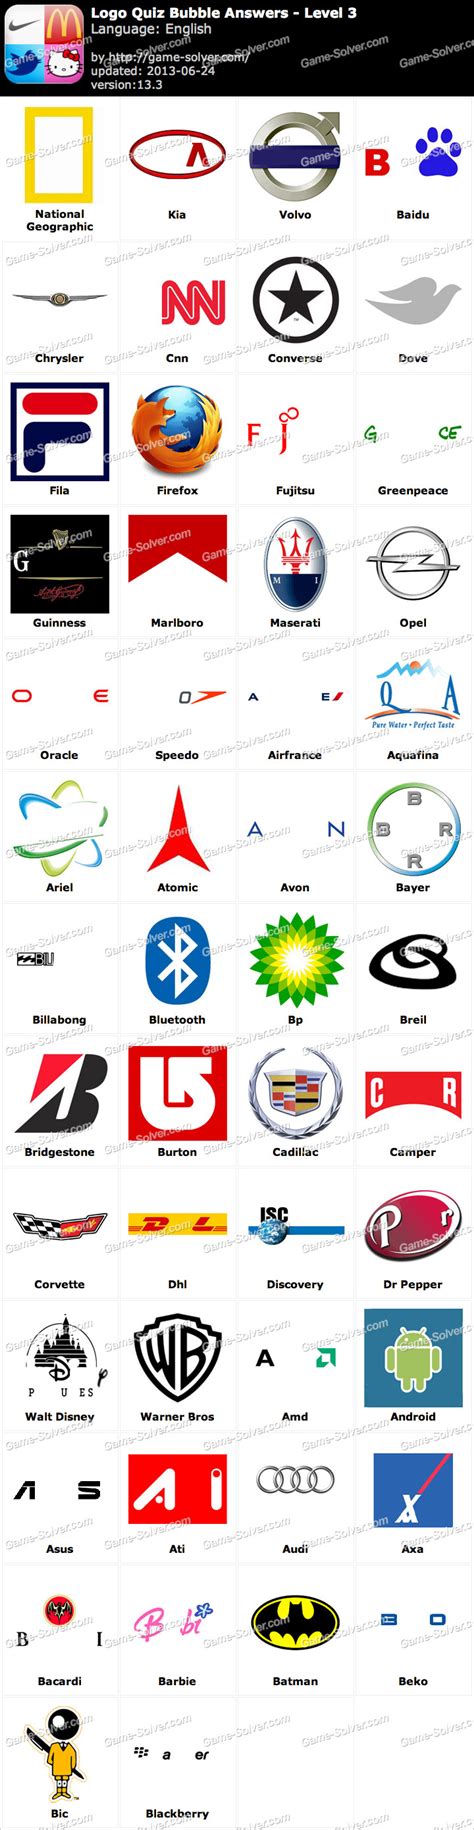 Logo Quiz By Bubble Answers Level 3 Game Solver